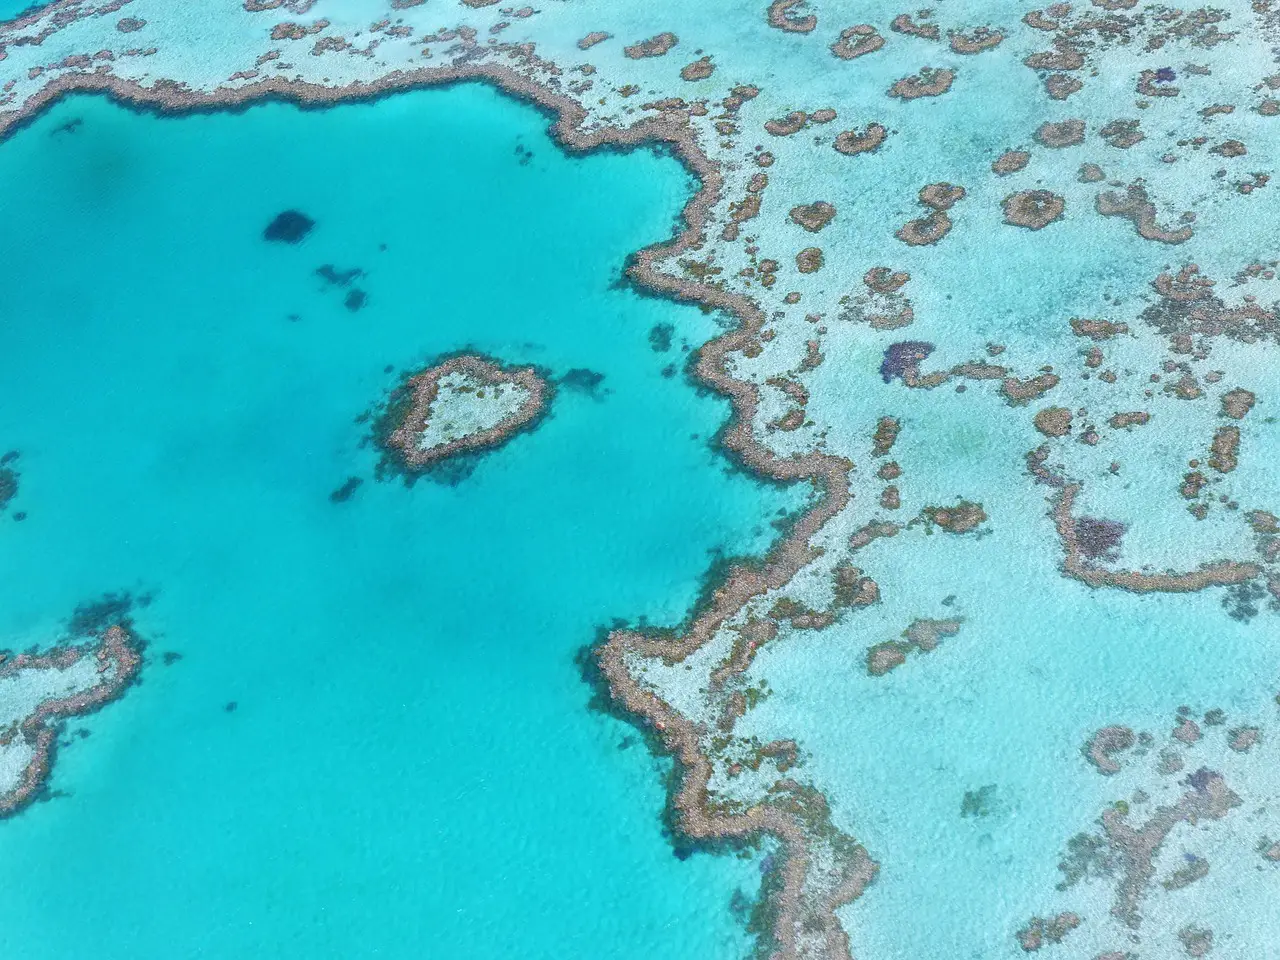 Great Barrier Reef Marine Park. One of the seven natural wonders of the world.